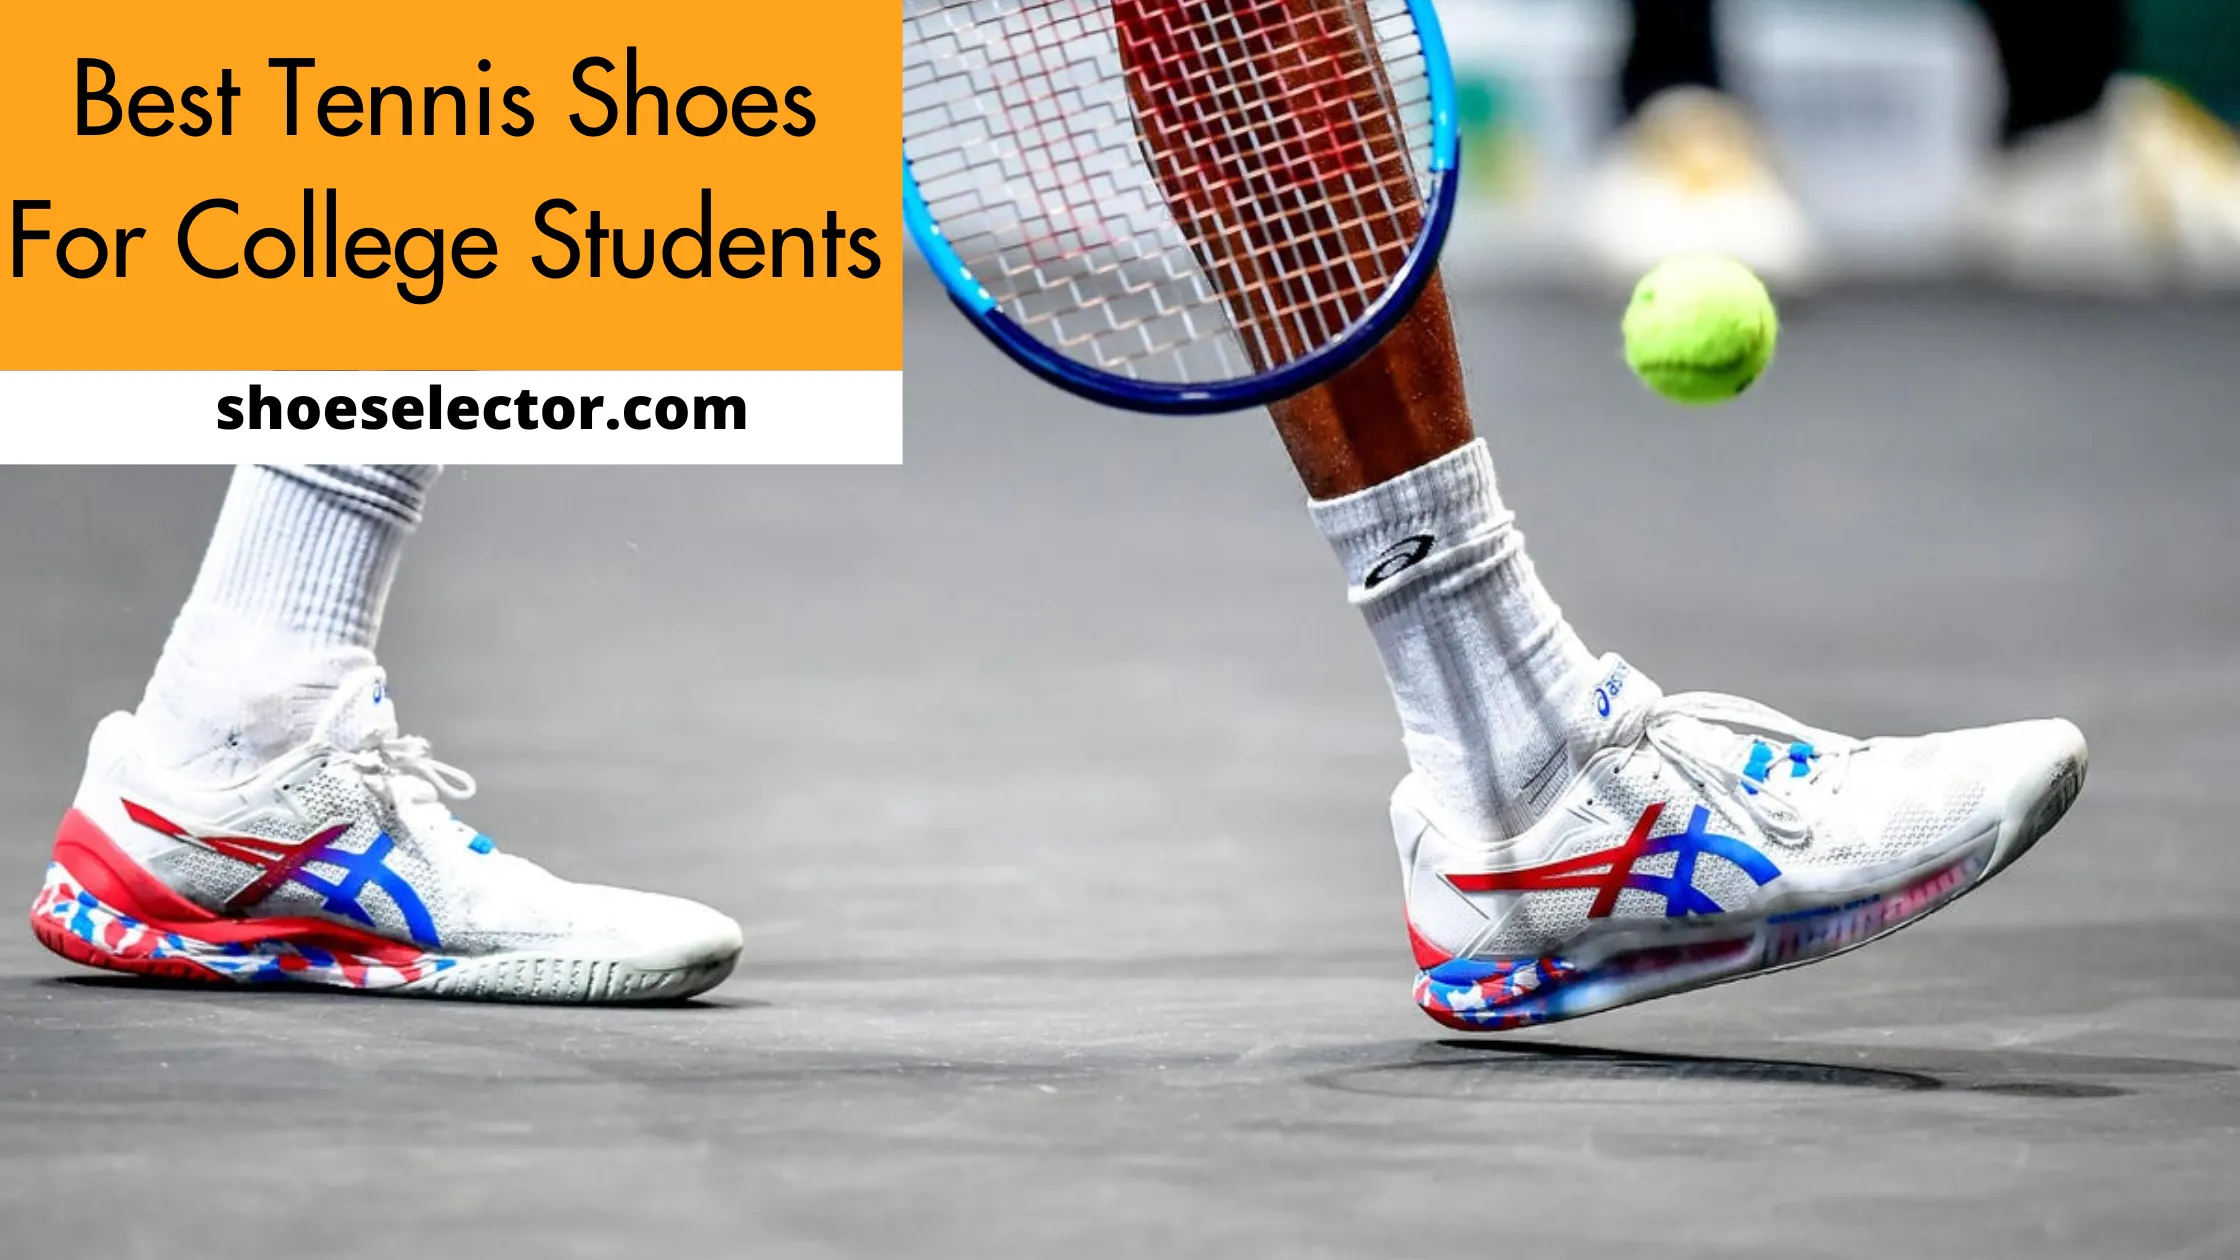 Best Tennis Shoes For College Students - For Girls & Boys